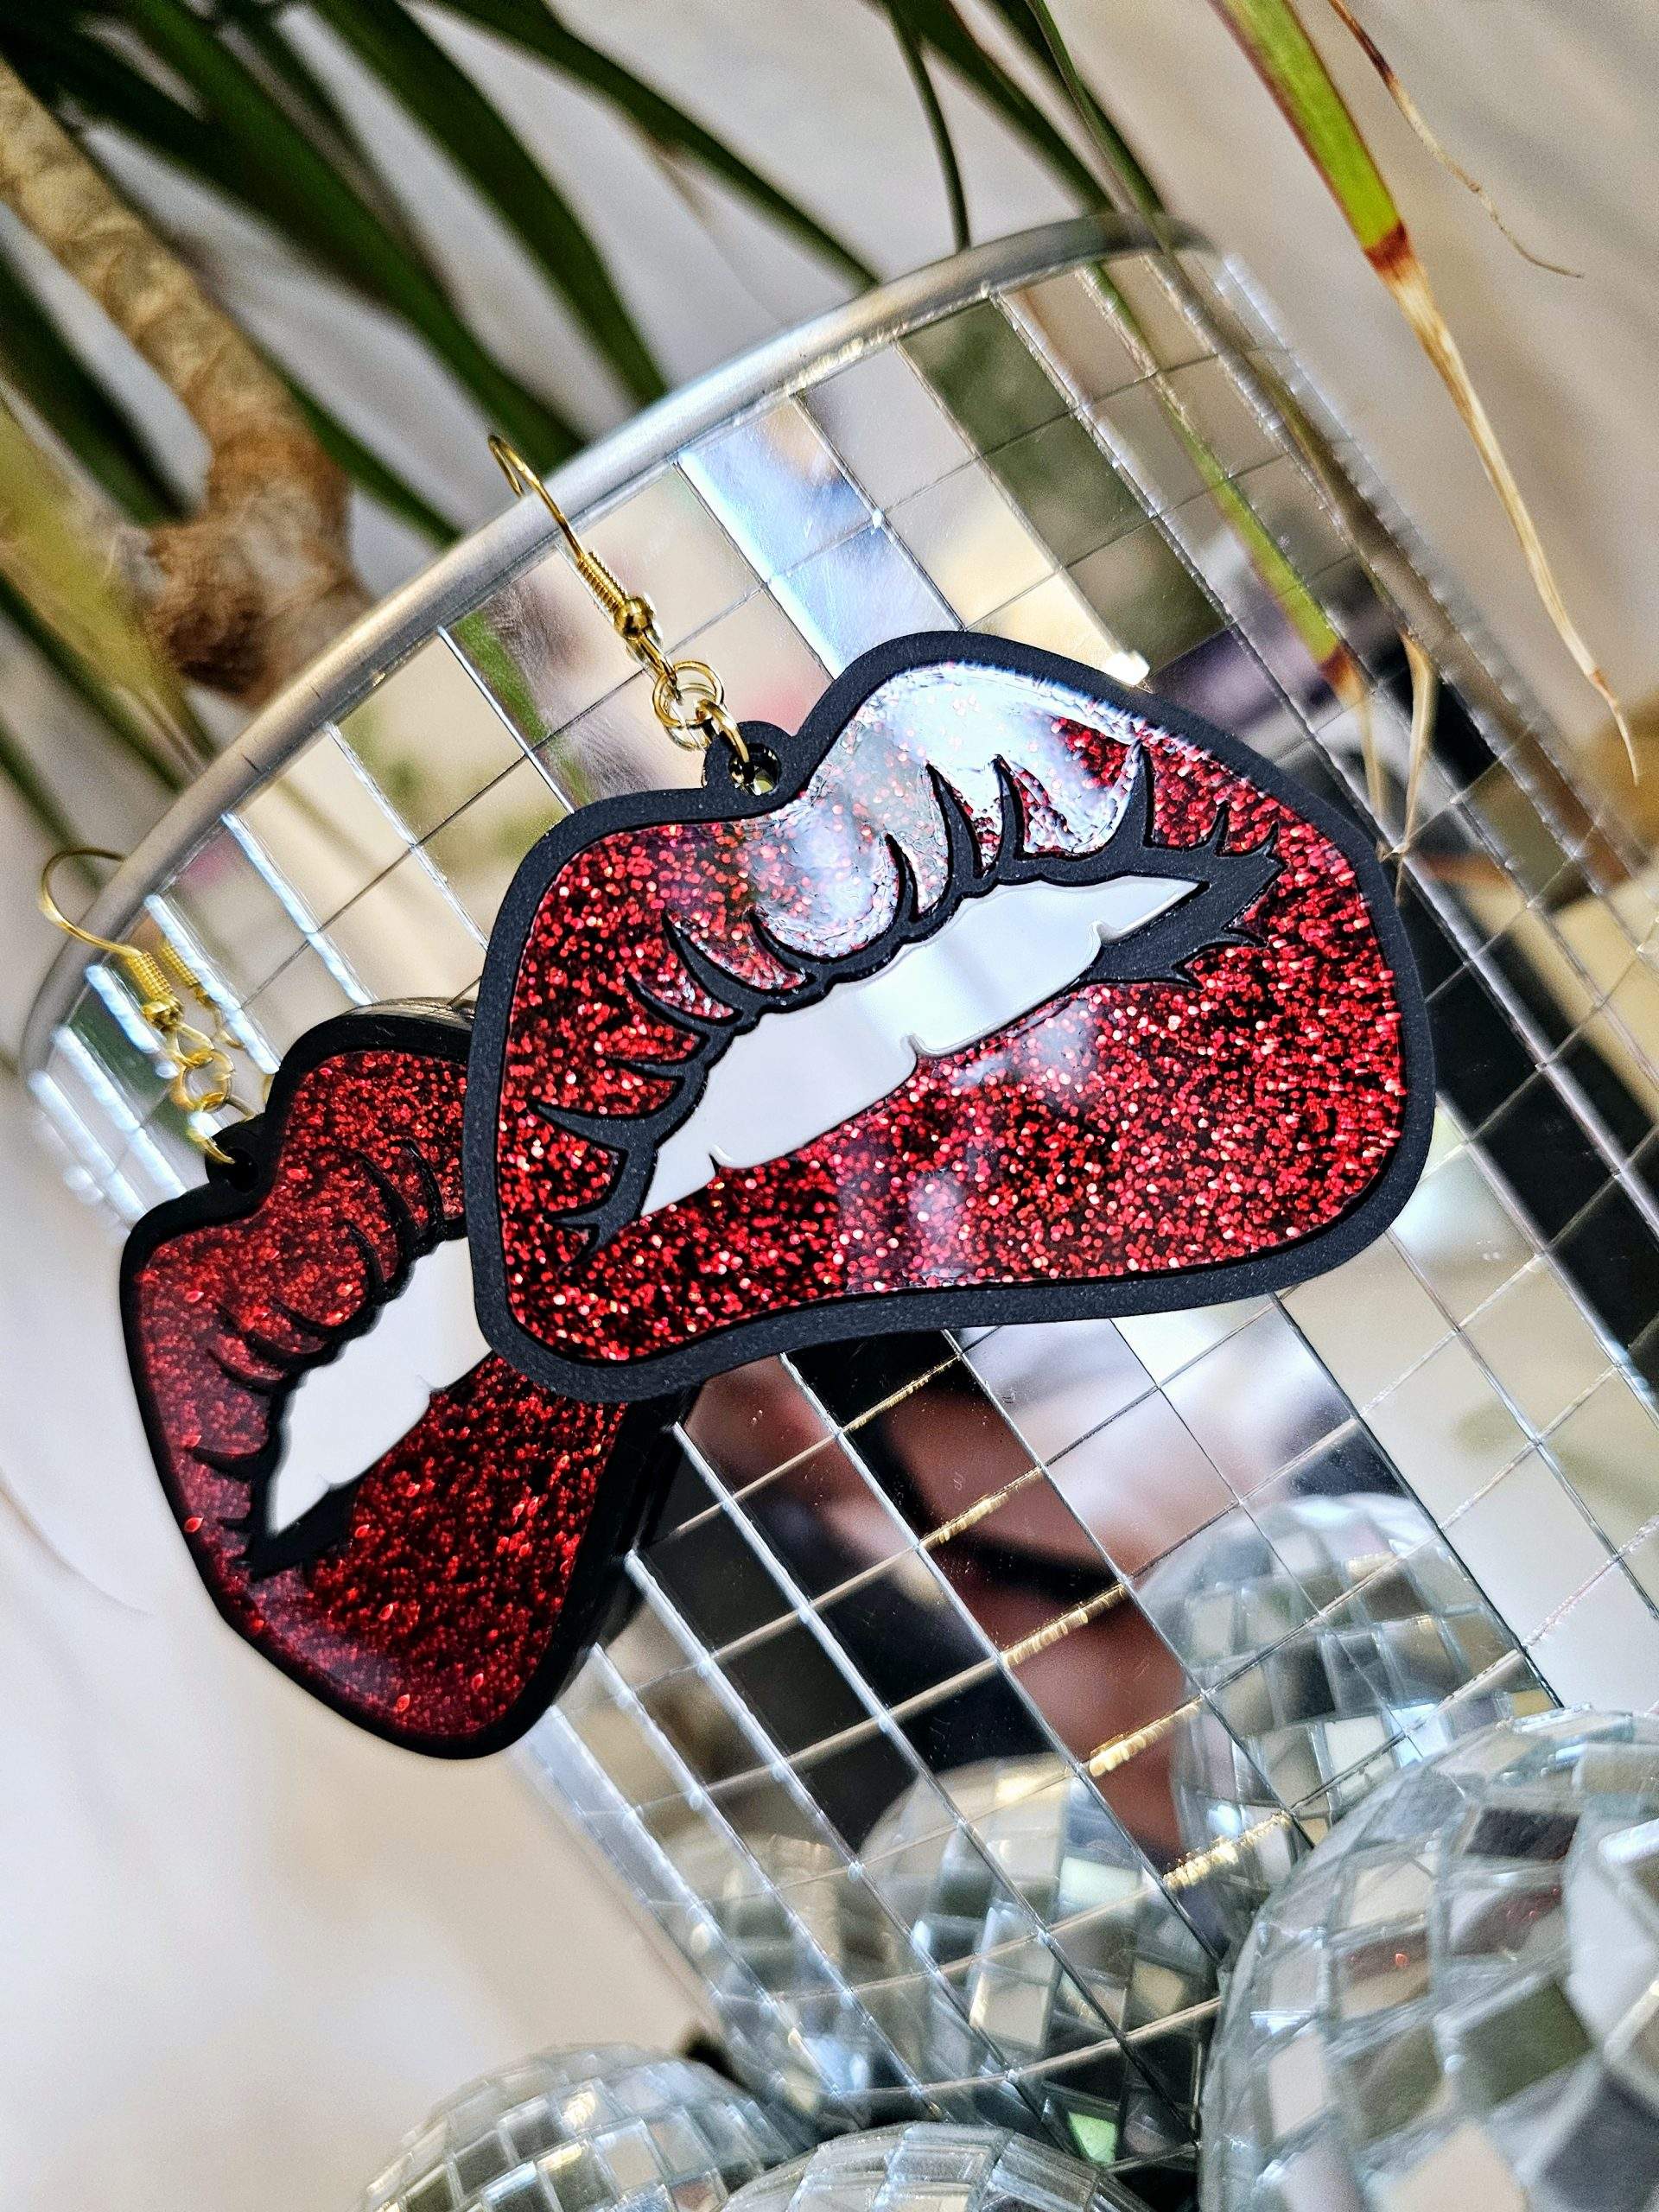 A pair of earrings in the shape of lips. They're in a pop art style with black outline and red glitter lips.